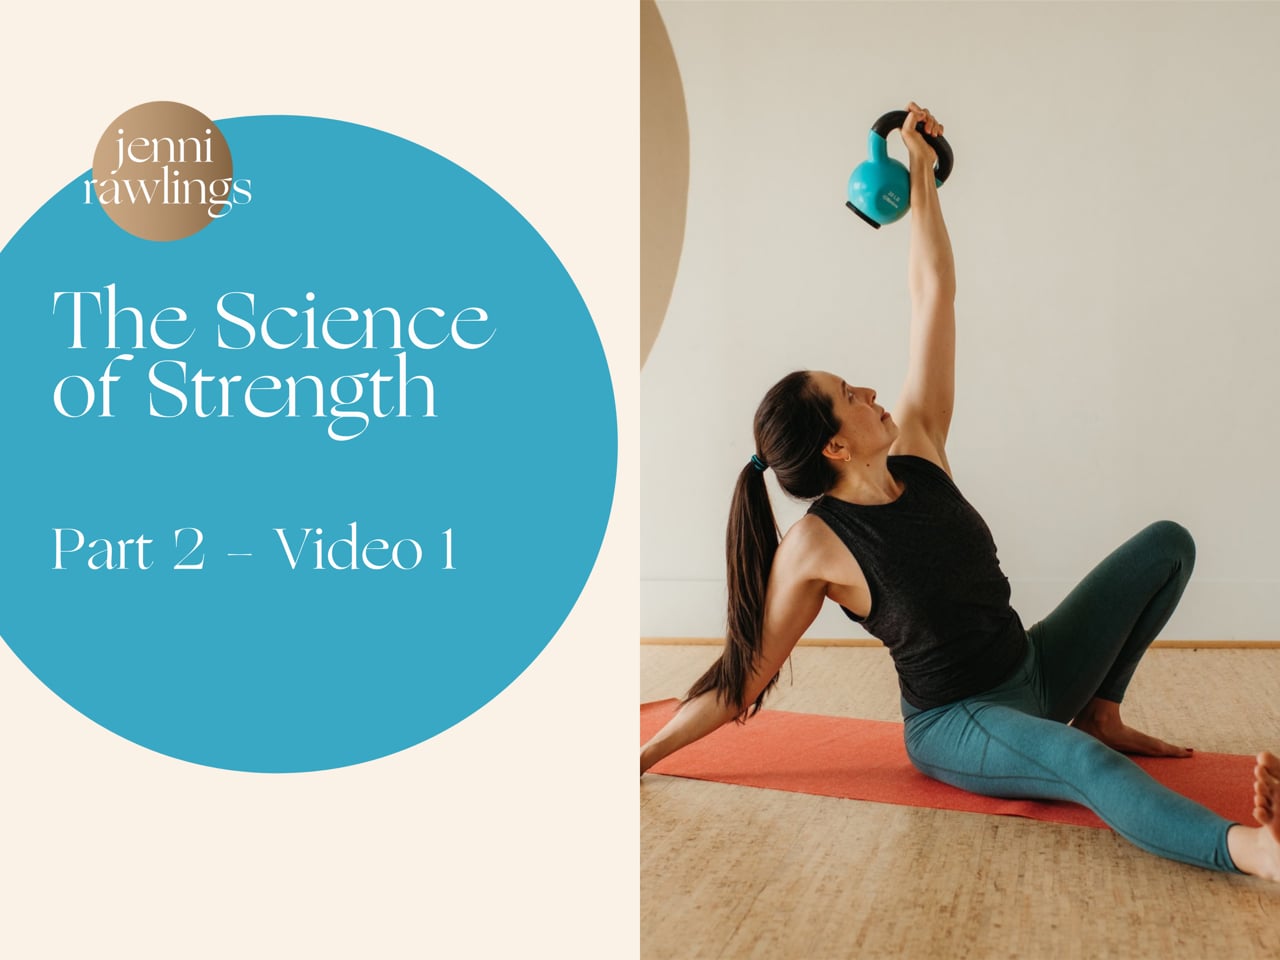 The Science of Strength Part 2, Video 1